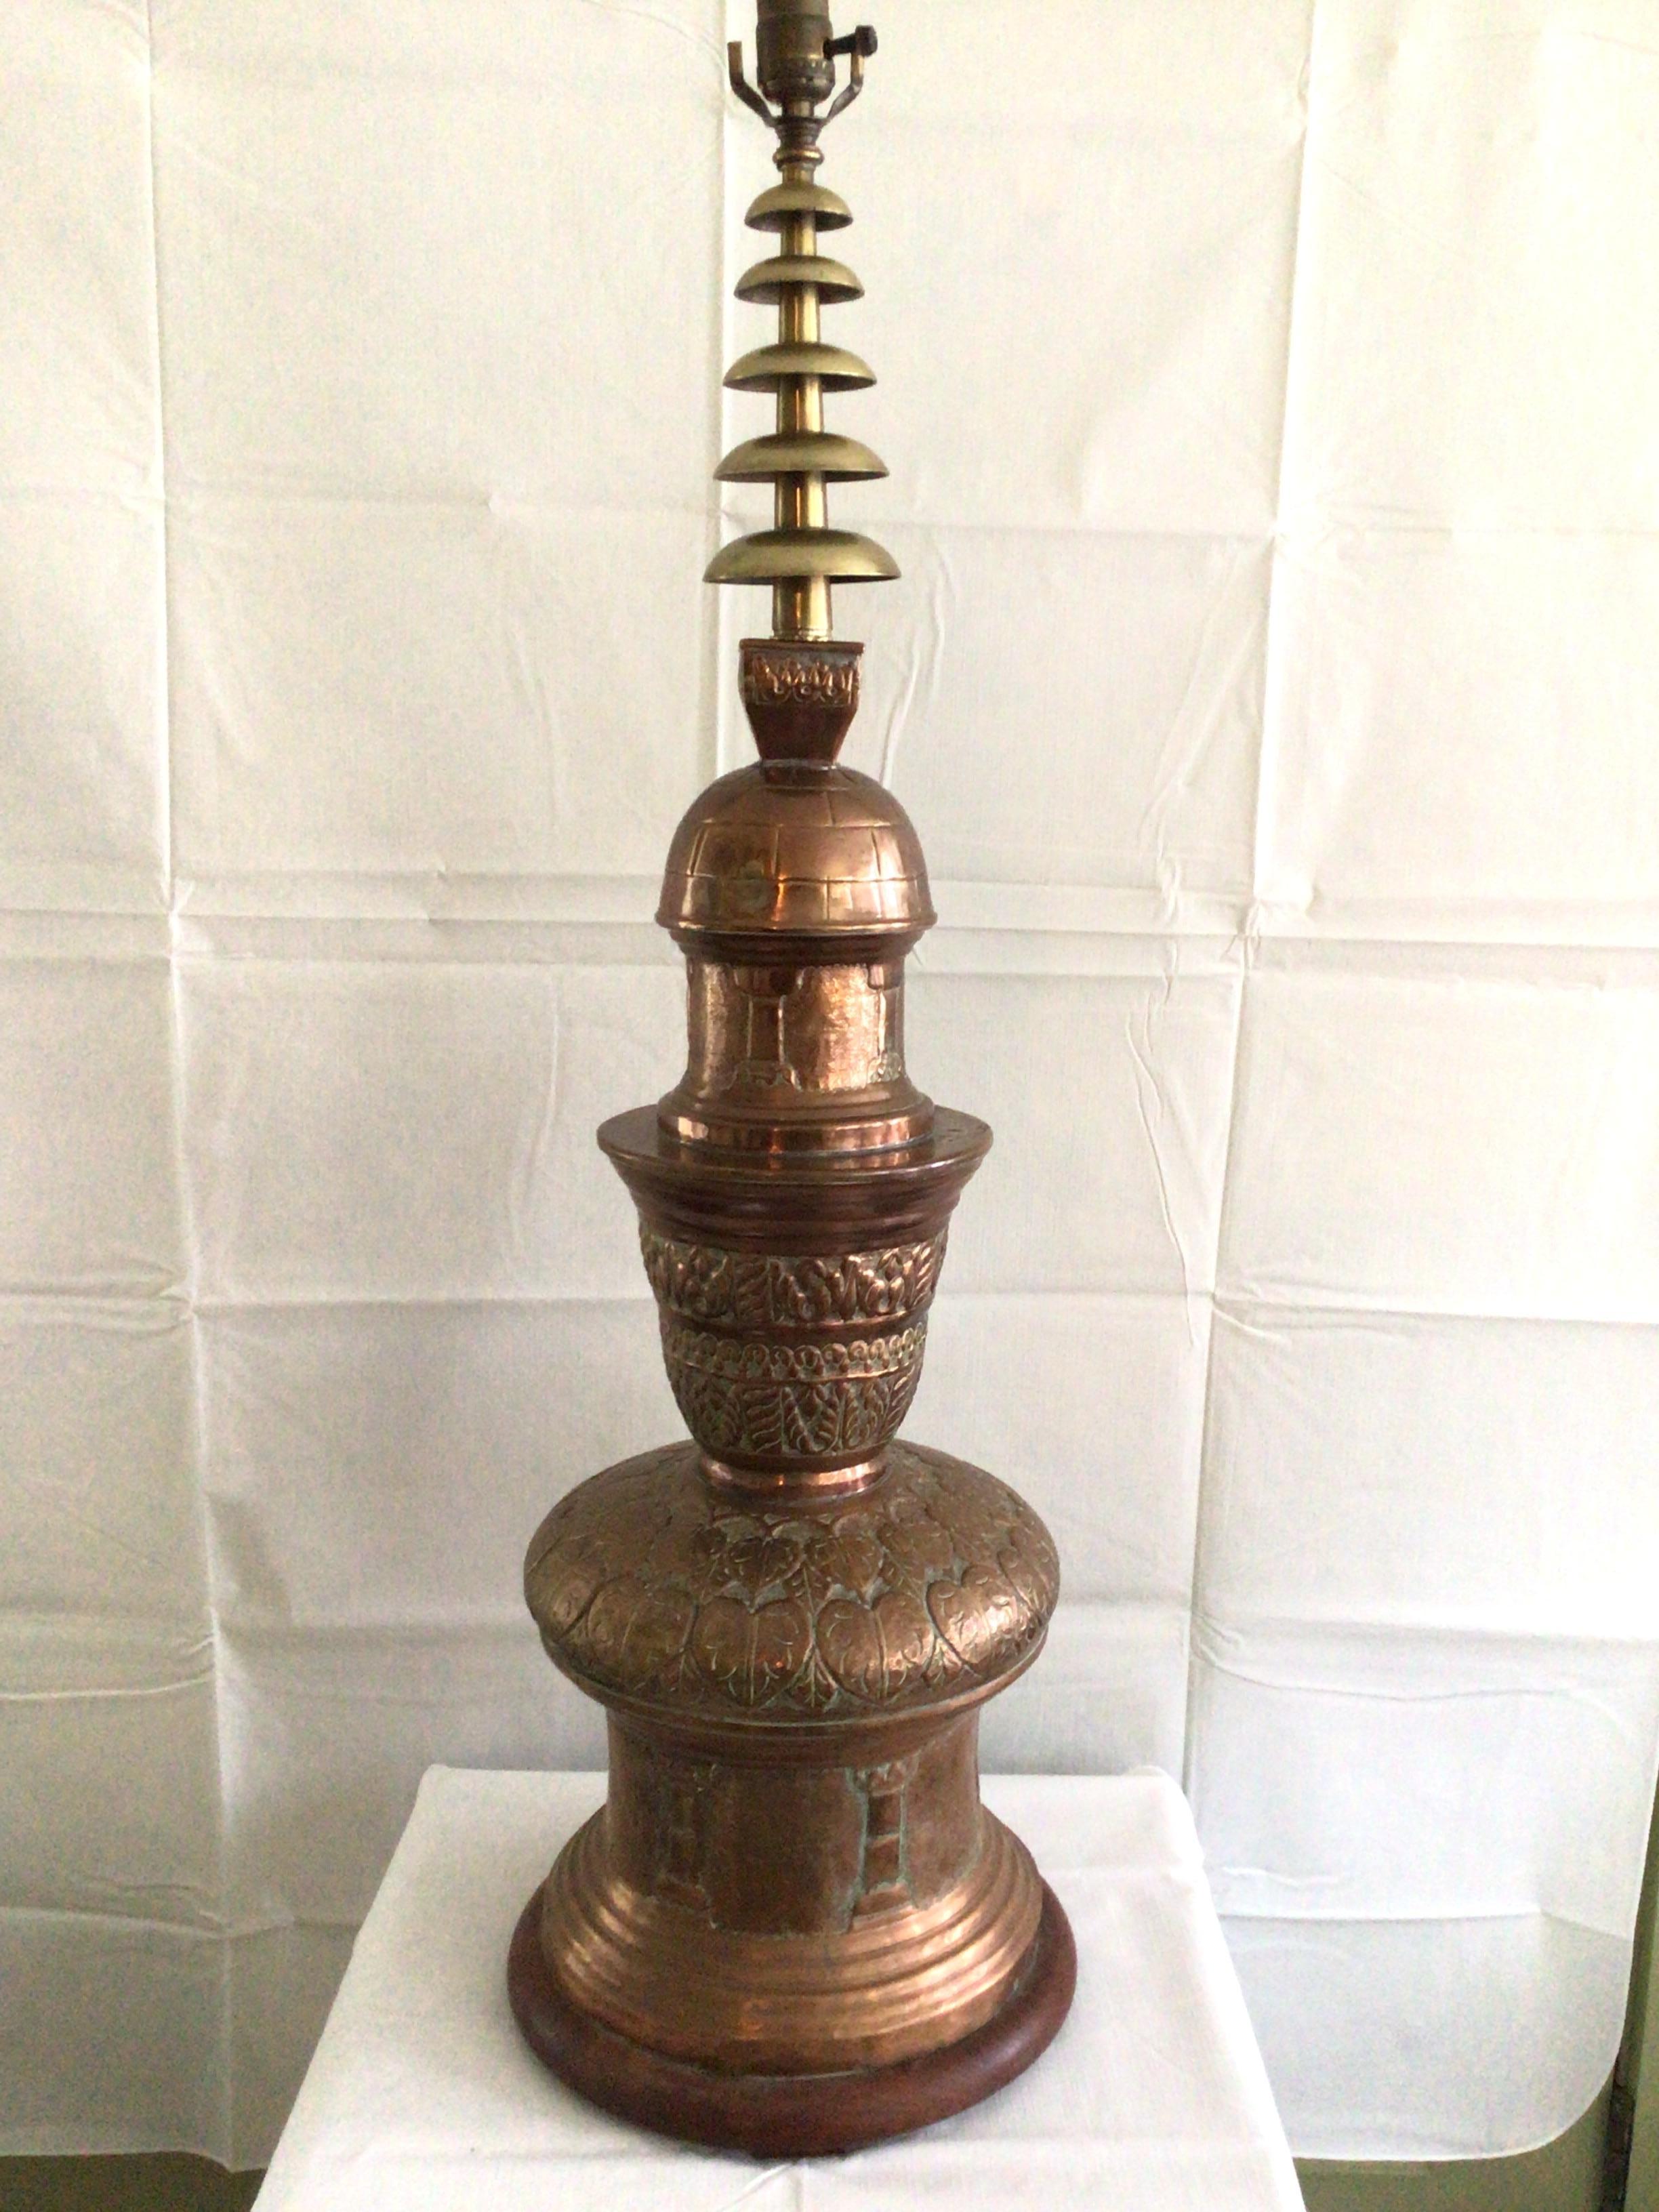 1950s copper and brass ornate table lamp on wood base.